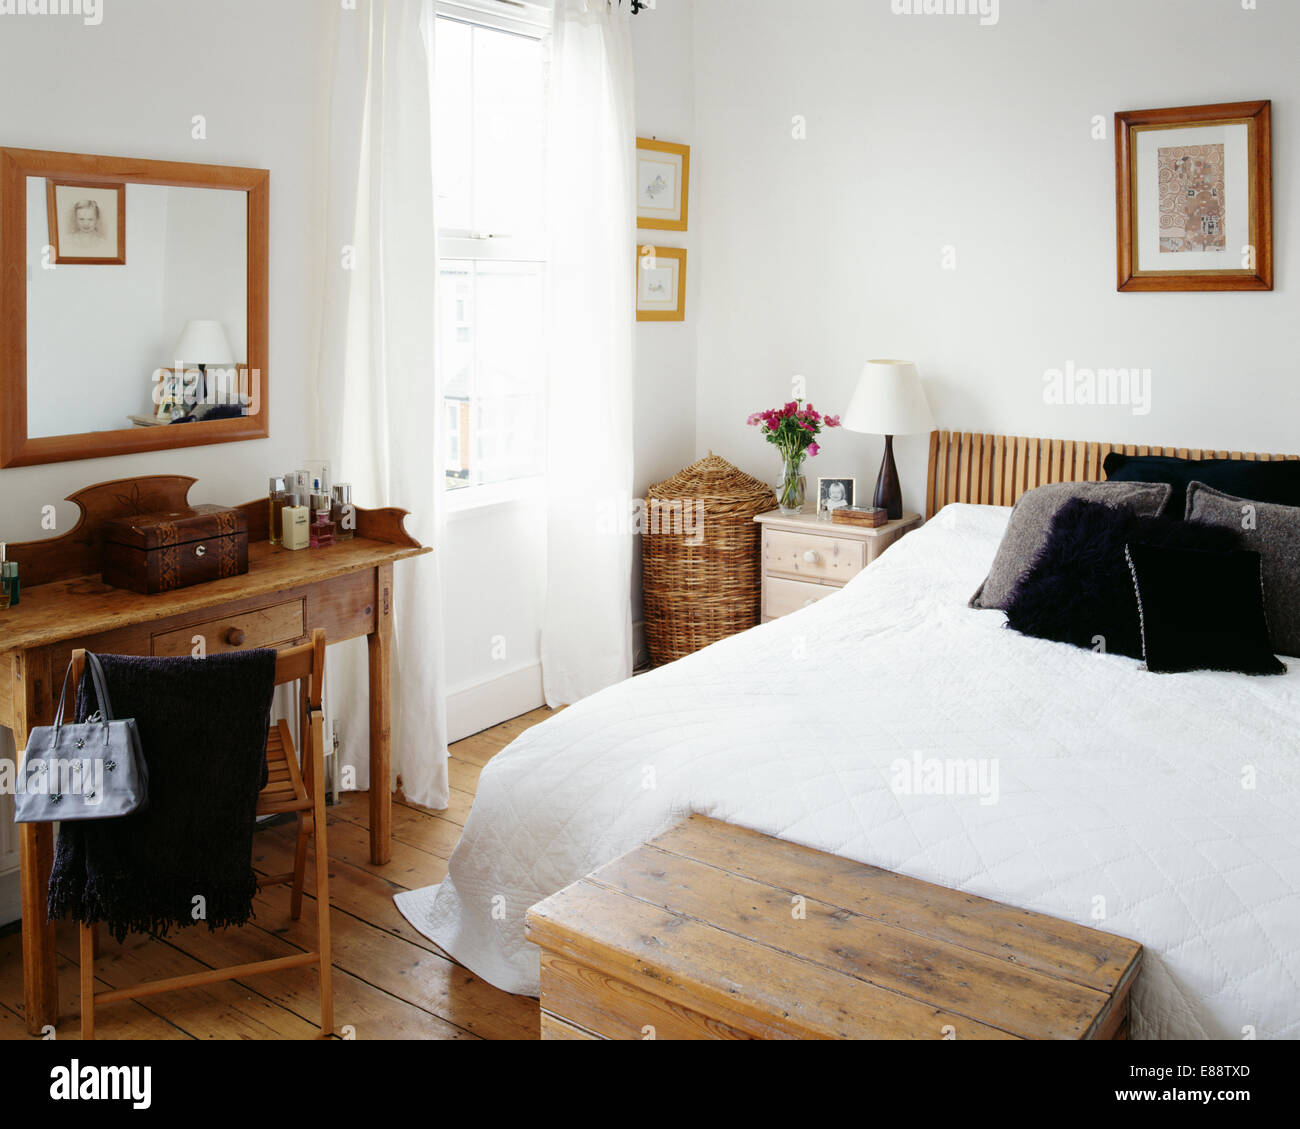 White quilt and black cushions on bed in economy-style bedroom with wooden mirror above simple pine table Stock Photo